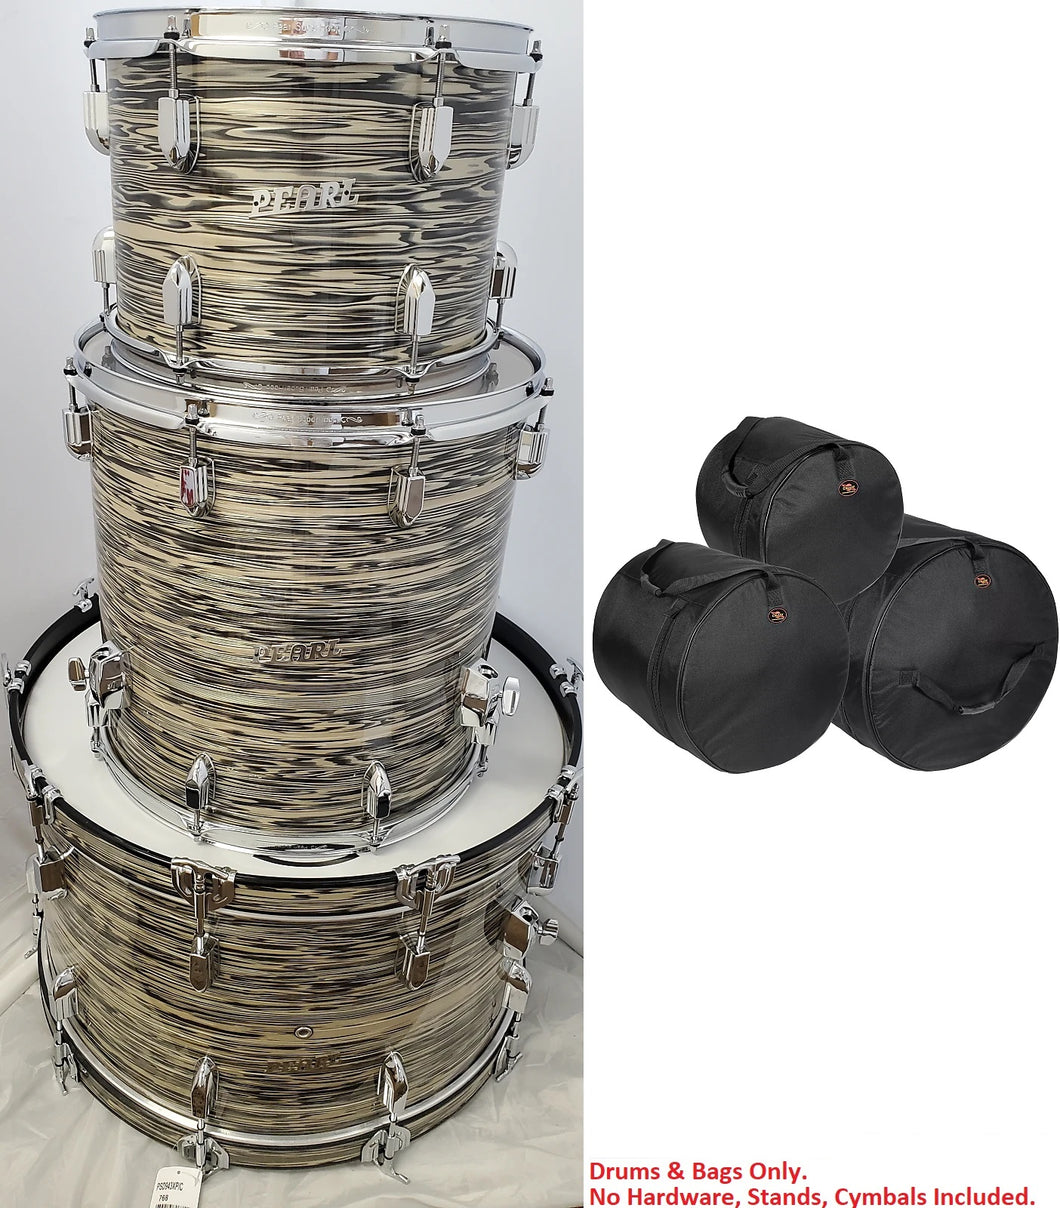 Pearl President Deluxe Desert Ripple 3pc Shell Pack 24x14 13x9 16x16 Drums +Bags | Authorized Dealer